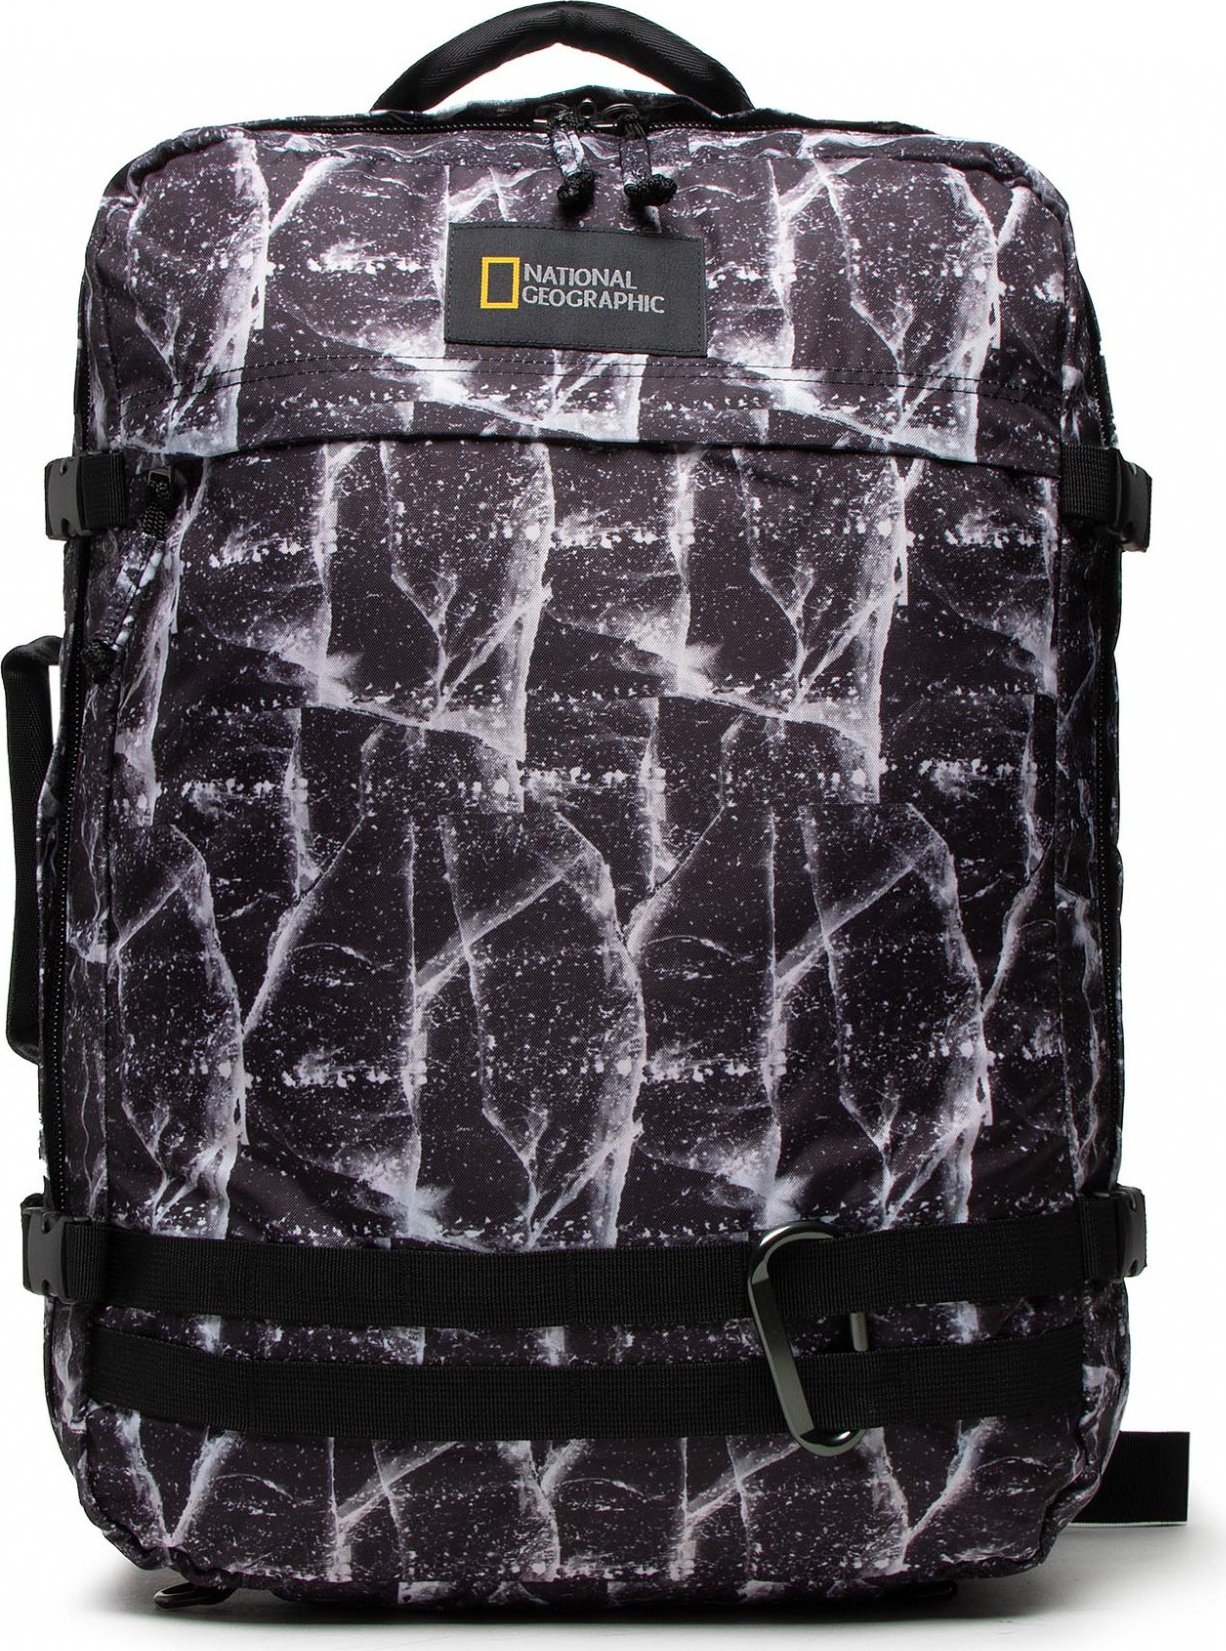 National Geographic Ng Hybrid Backpack Cracked N11801.96CRA